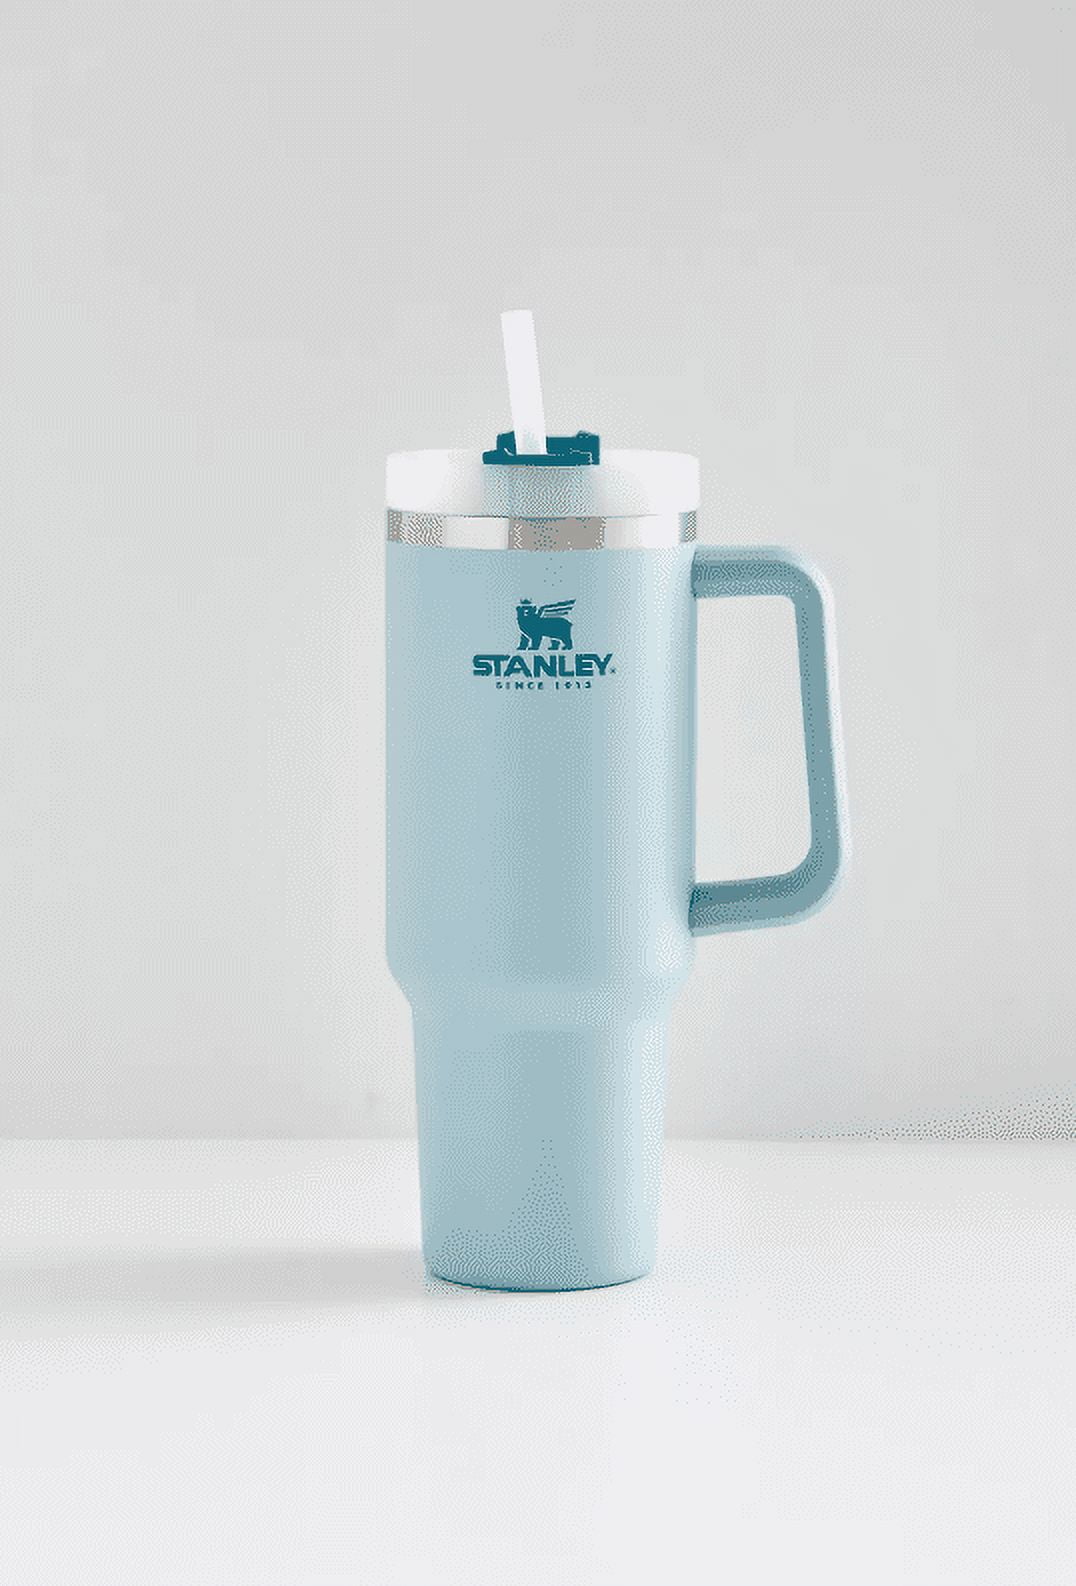 Stanley Adventure Quencher Tumbler 40 Oz Matte Stormy Sea for Sale in  Fresno, CA - OfferUp